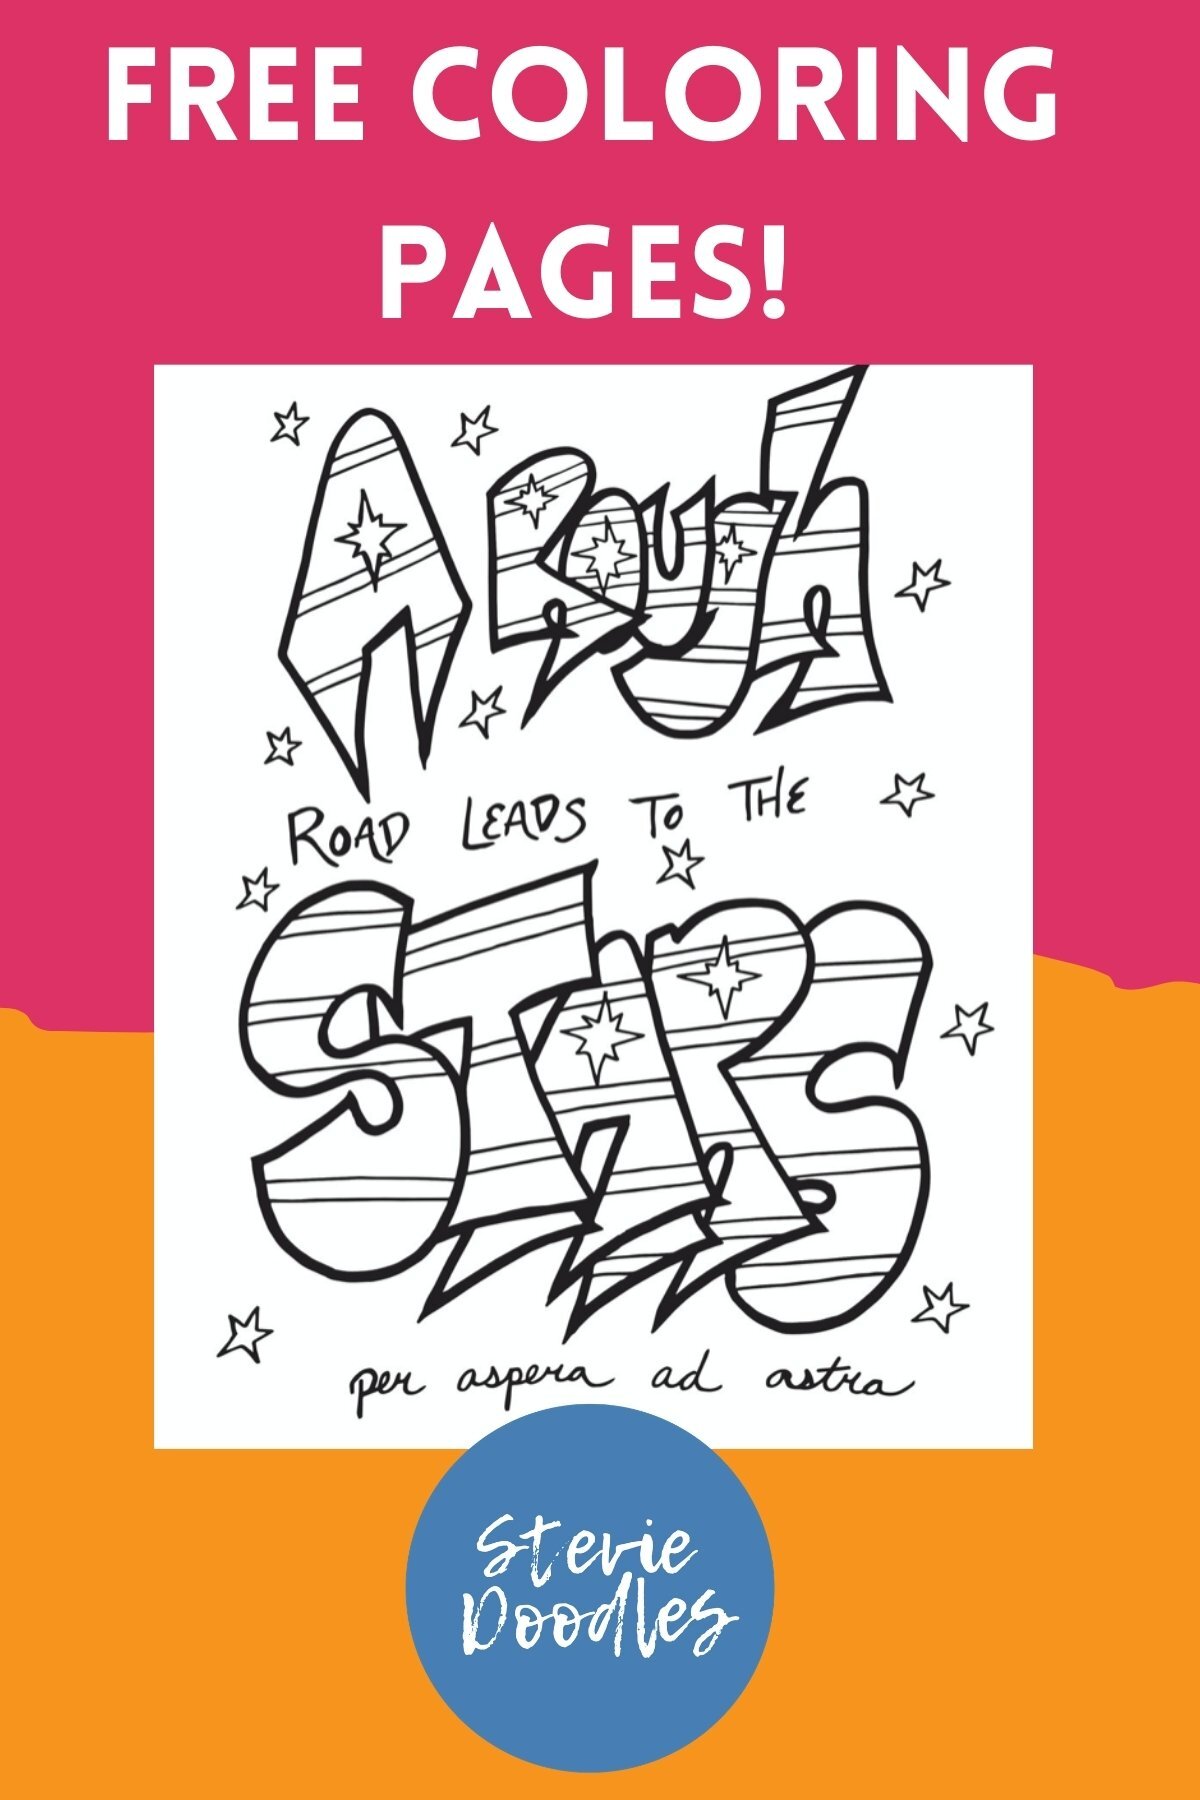 Per Aspera Ad Astra- A rough road leads to the starsThis page and 1000+ more free printable coloring sheets at Stevie Doodles